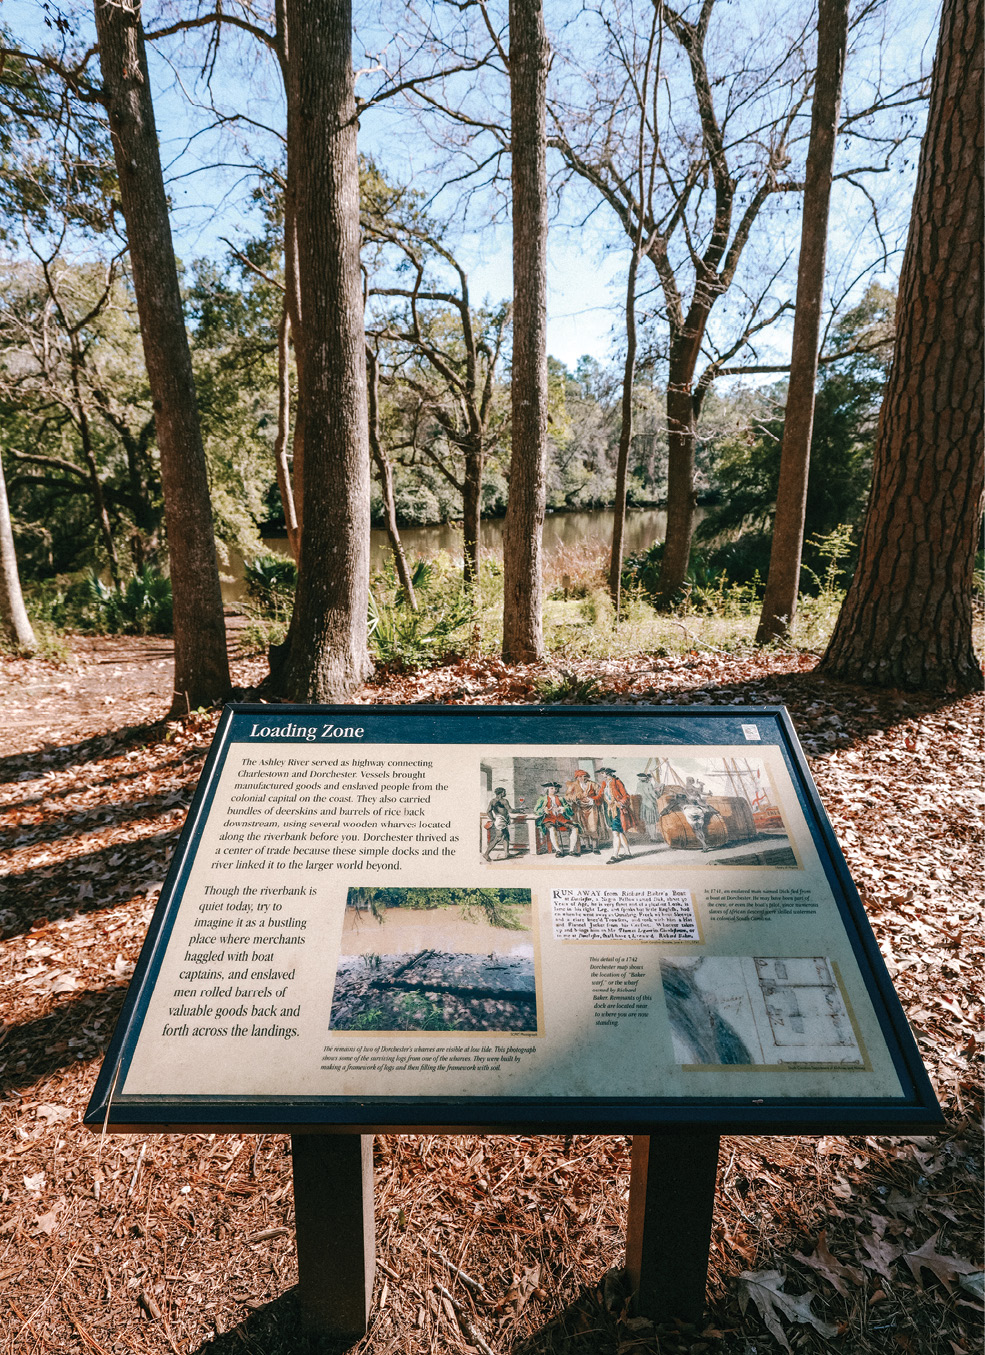 Interpretive exhibits along the trail explain the history of the former village, including the circa- 1751 bell tower, while an active archaeology program continues to reveal the past.